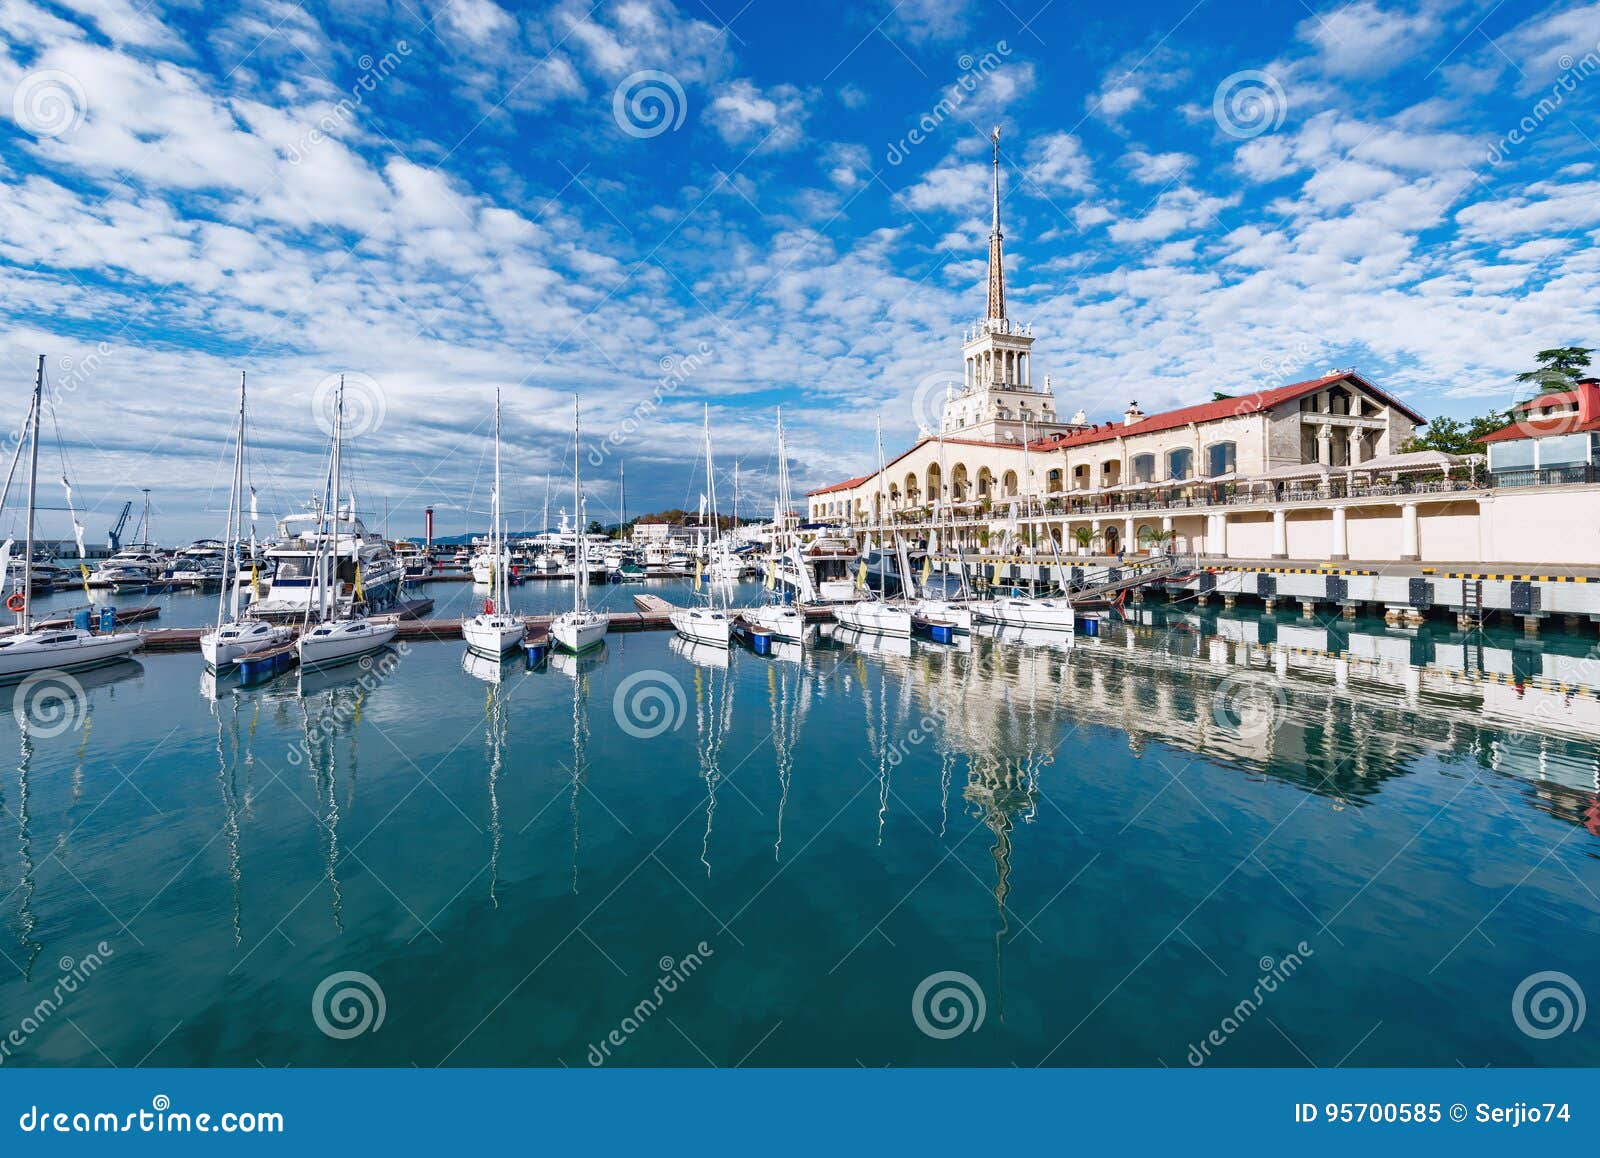 yachts and boats in sochi.